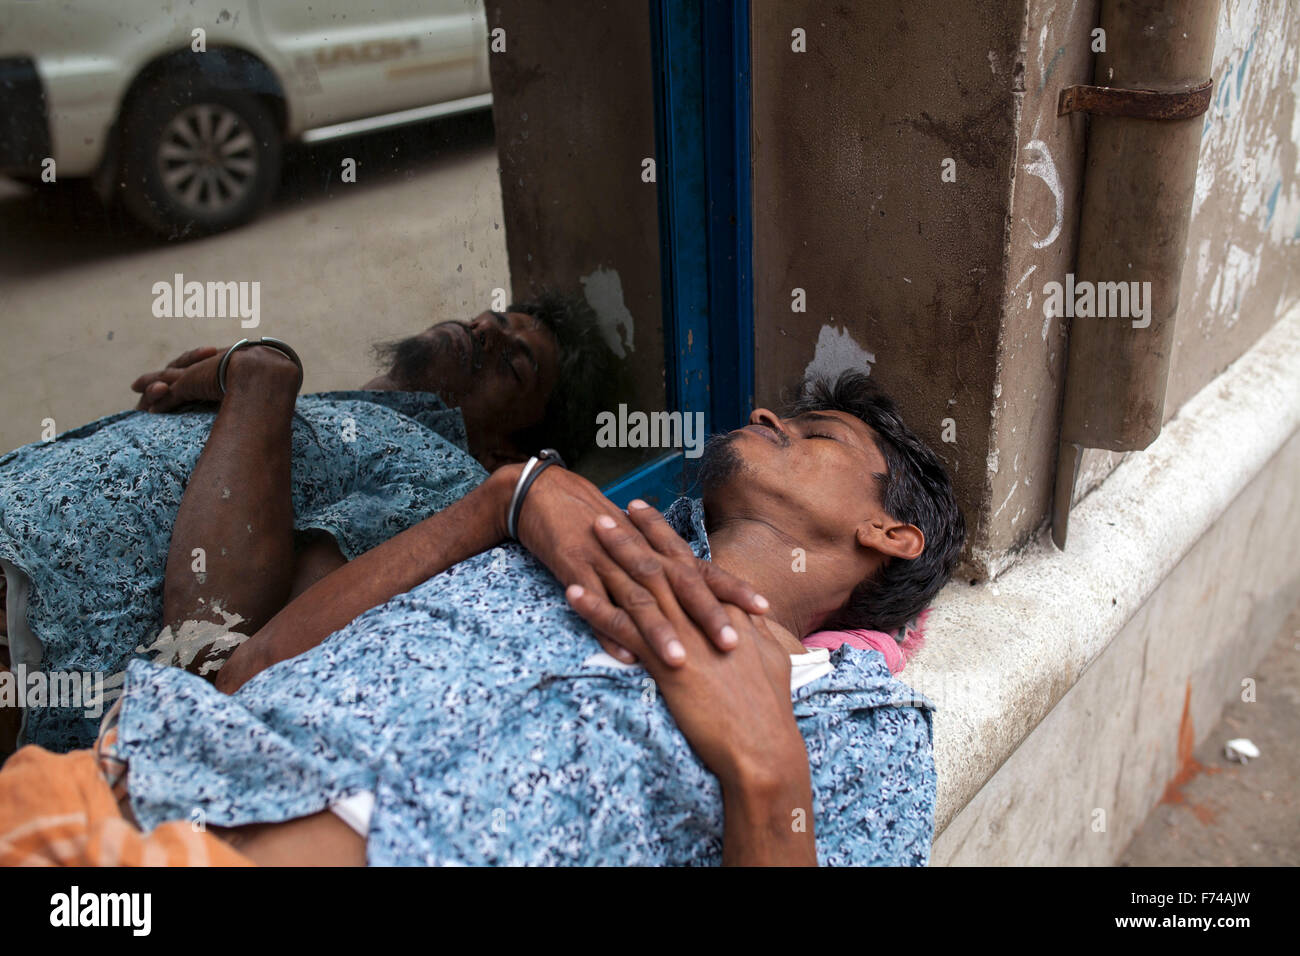 DHAKA, BANGLADESH 17th November: A man sleeping beside road in Old Dhaka on November 17, 2015. Old Dhaka is a term used to refer to the historic old city of Dhaka, the capital of modern Bangladesh. It was founded in 1608 as Jahangir Nagar, the capital of Mughal Bengal. Stock Photo